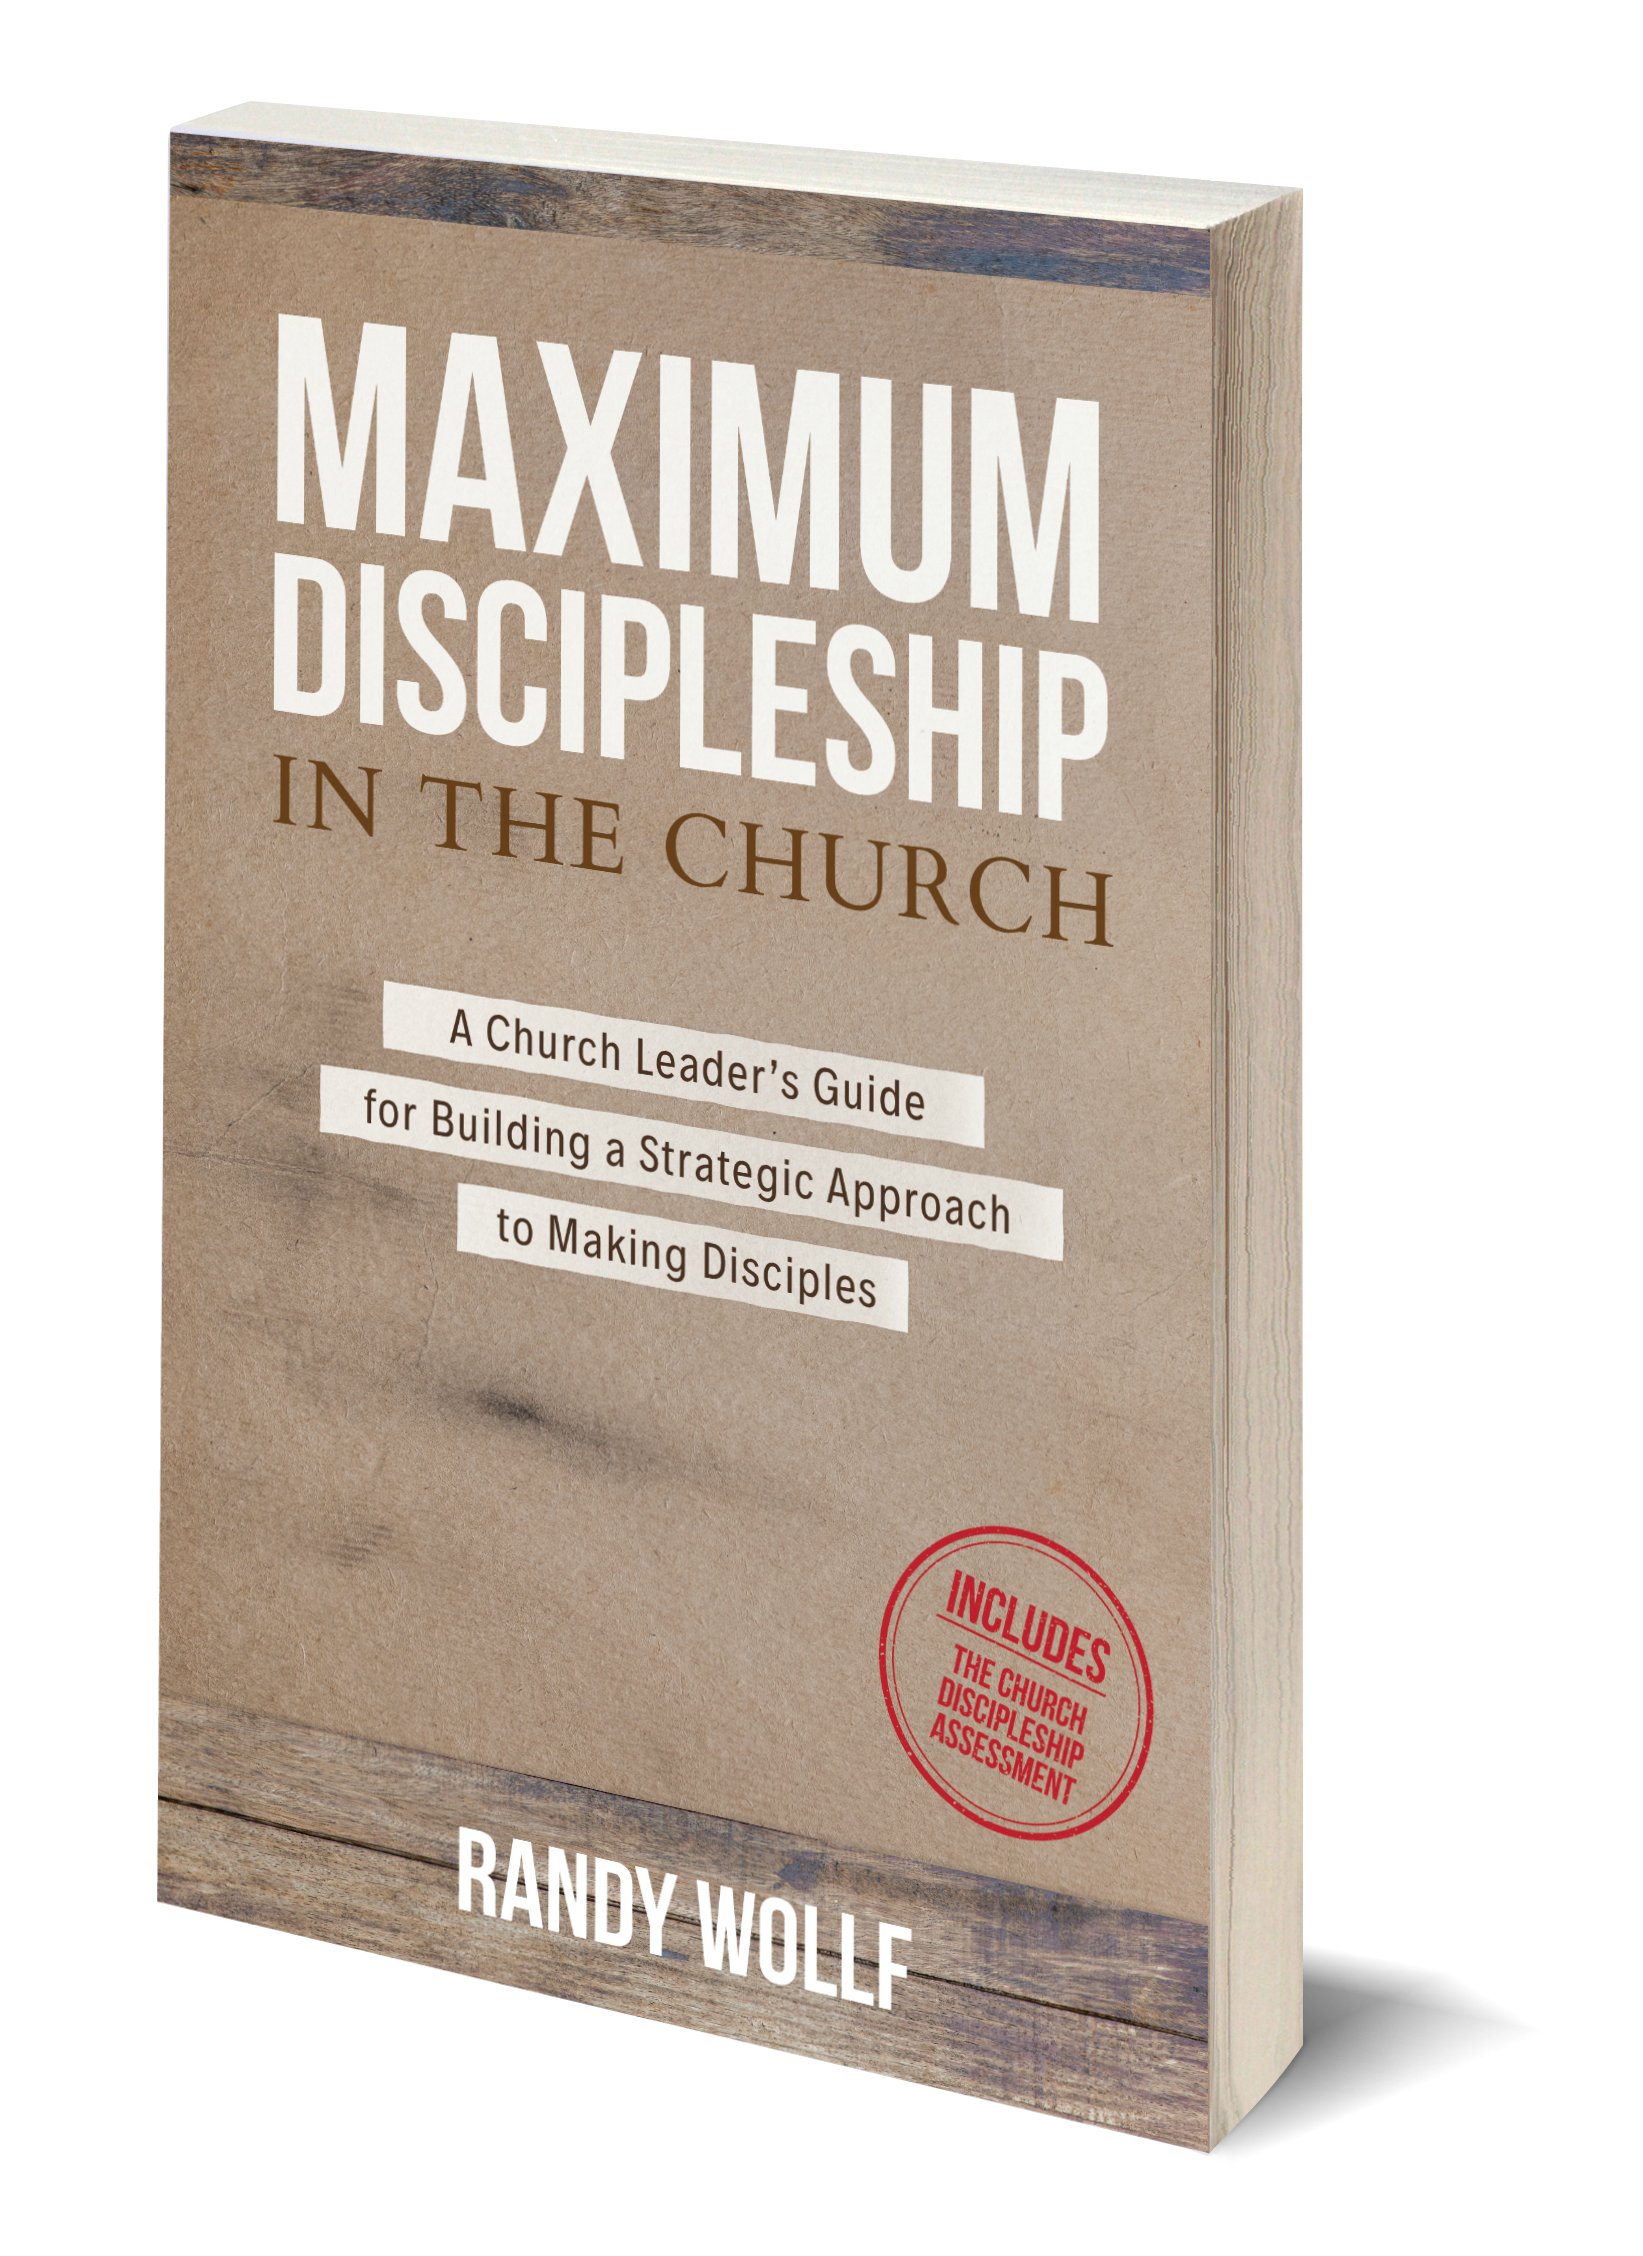 Book cover for Maximum Discipleship in the Church by Randy Wollf